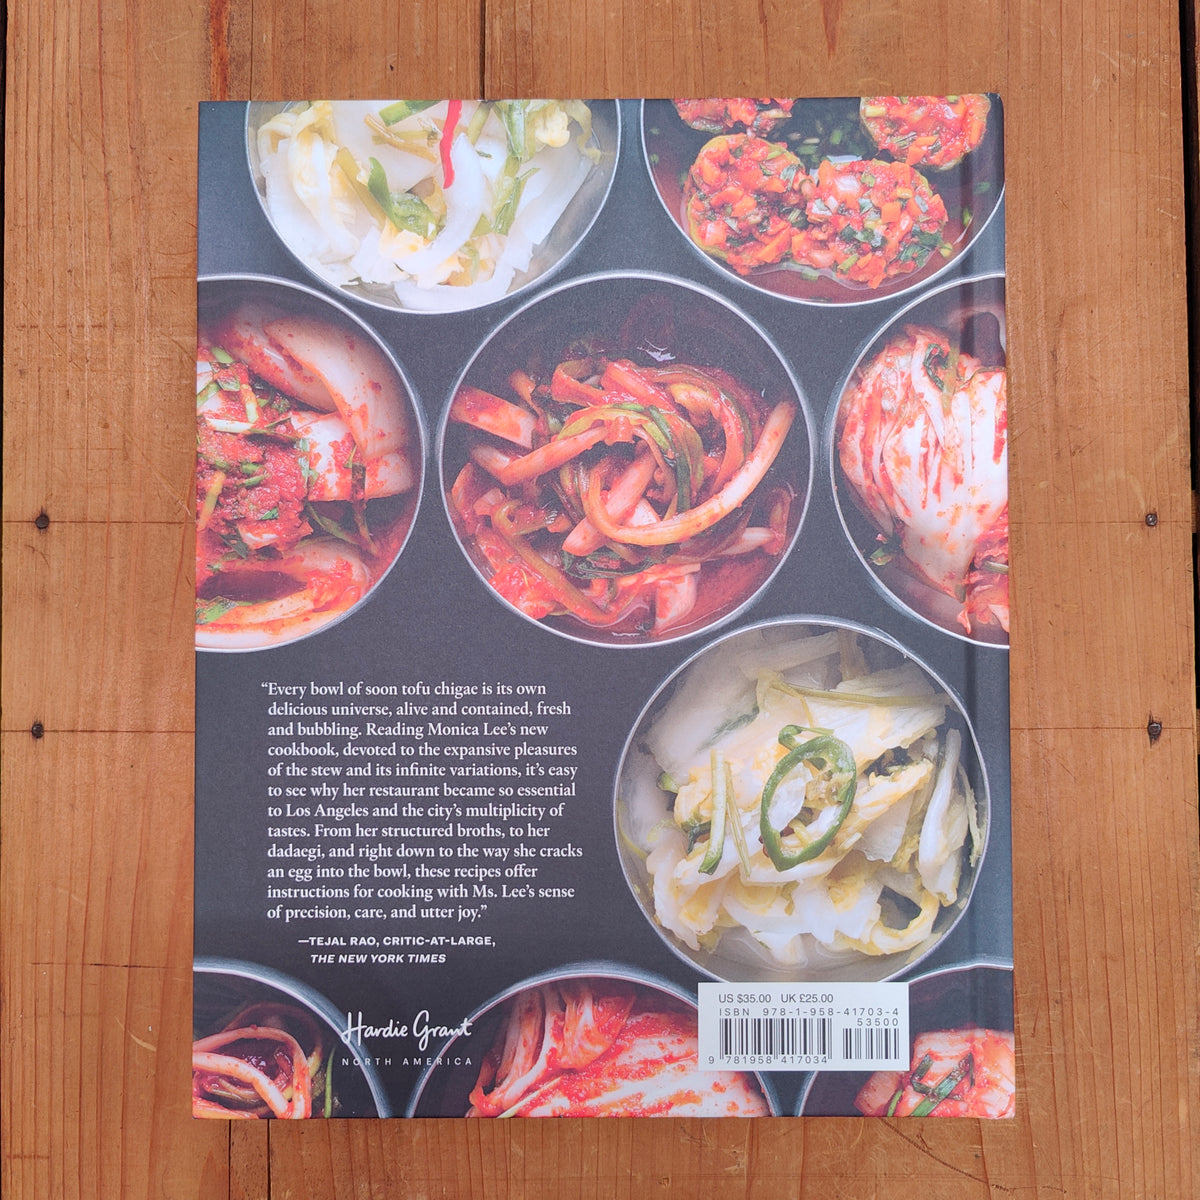 Sohn-mat: Recipes and Flavors of Korean Home Cooking - Monica Lee and Tien Nguyen